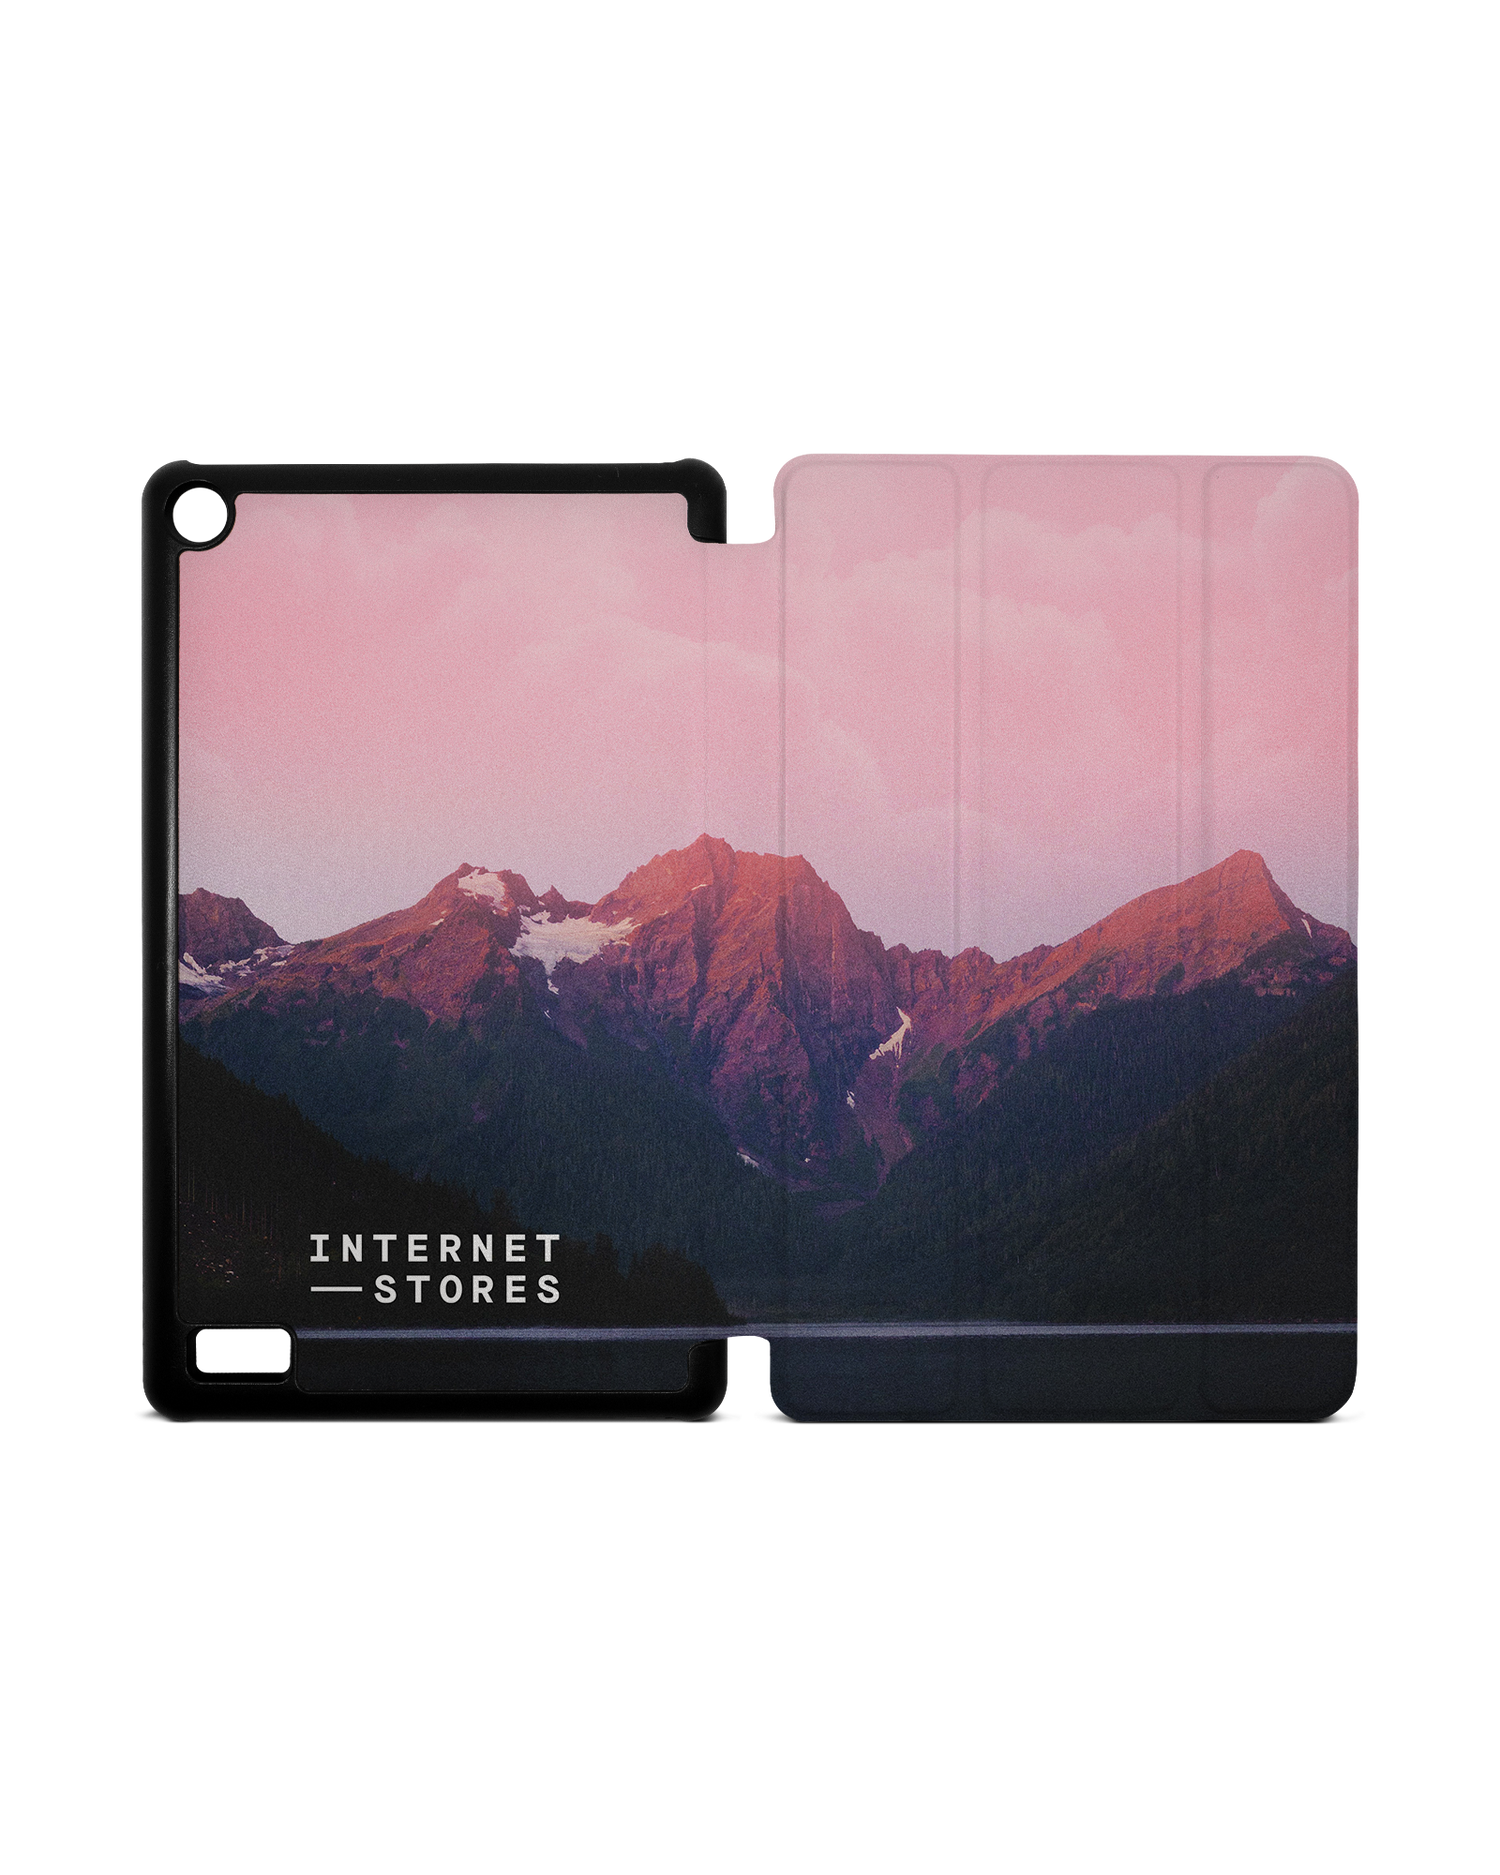 Lake Tablet Smart Case for Amazon Fire 7: Opened